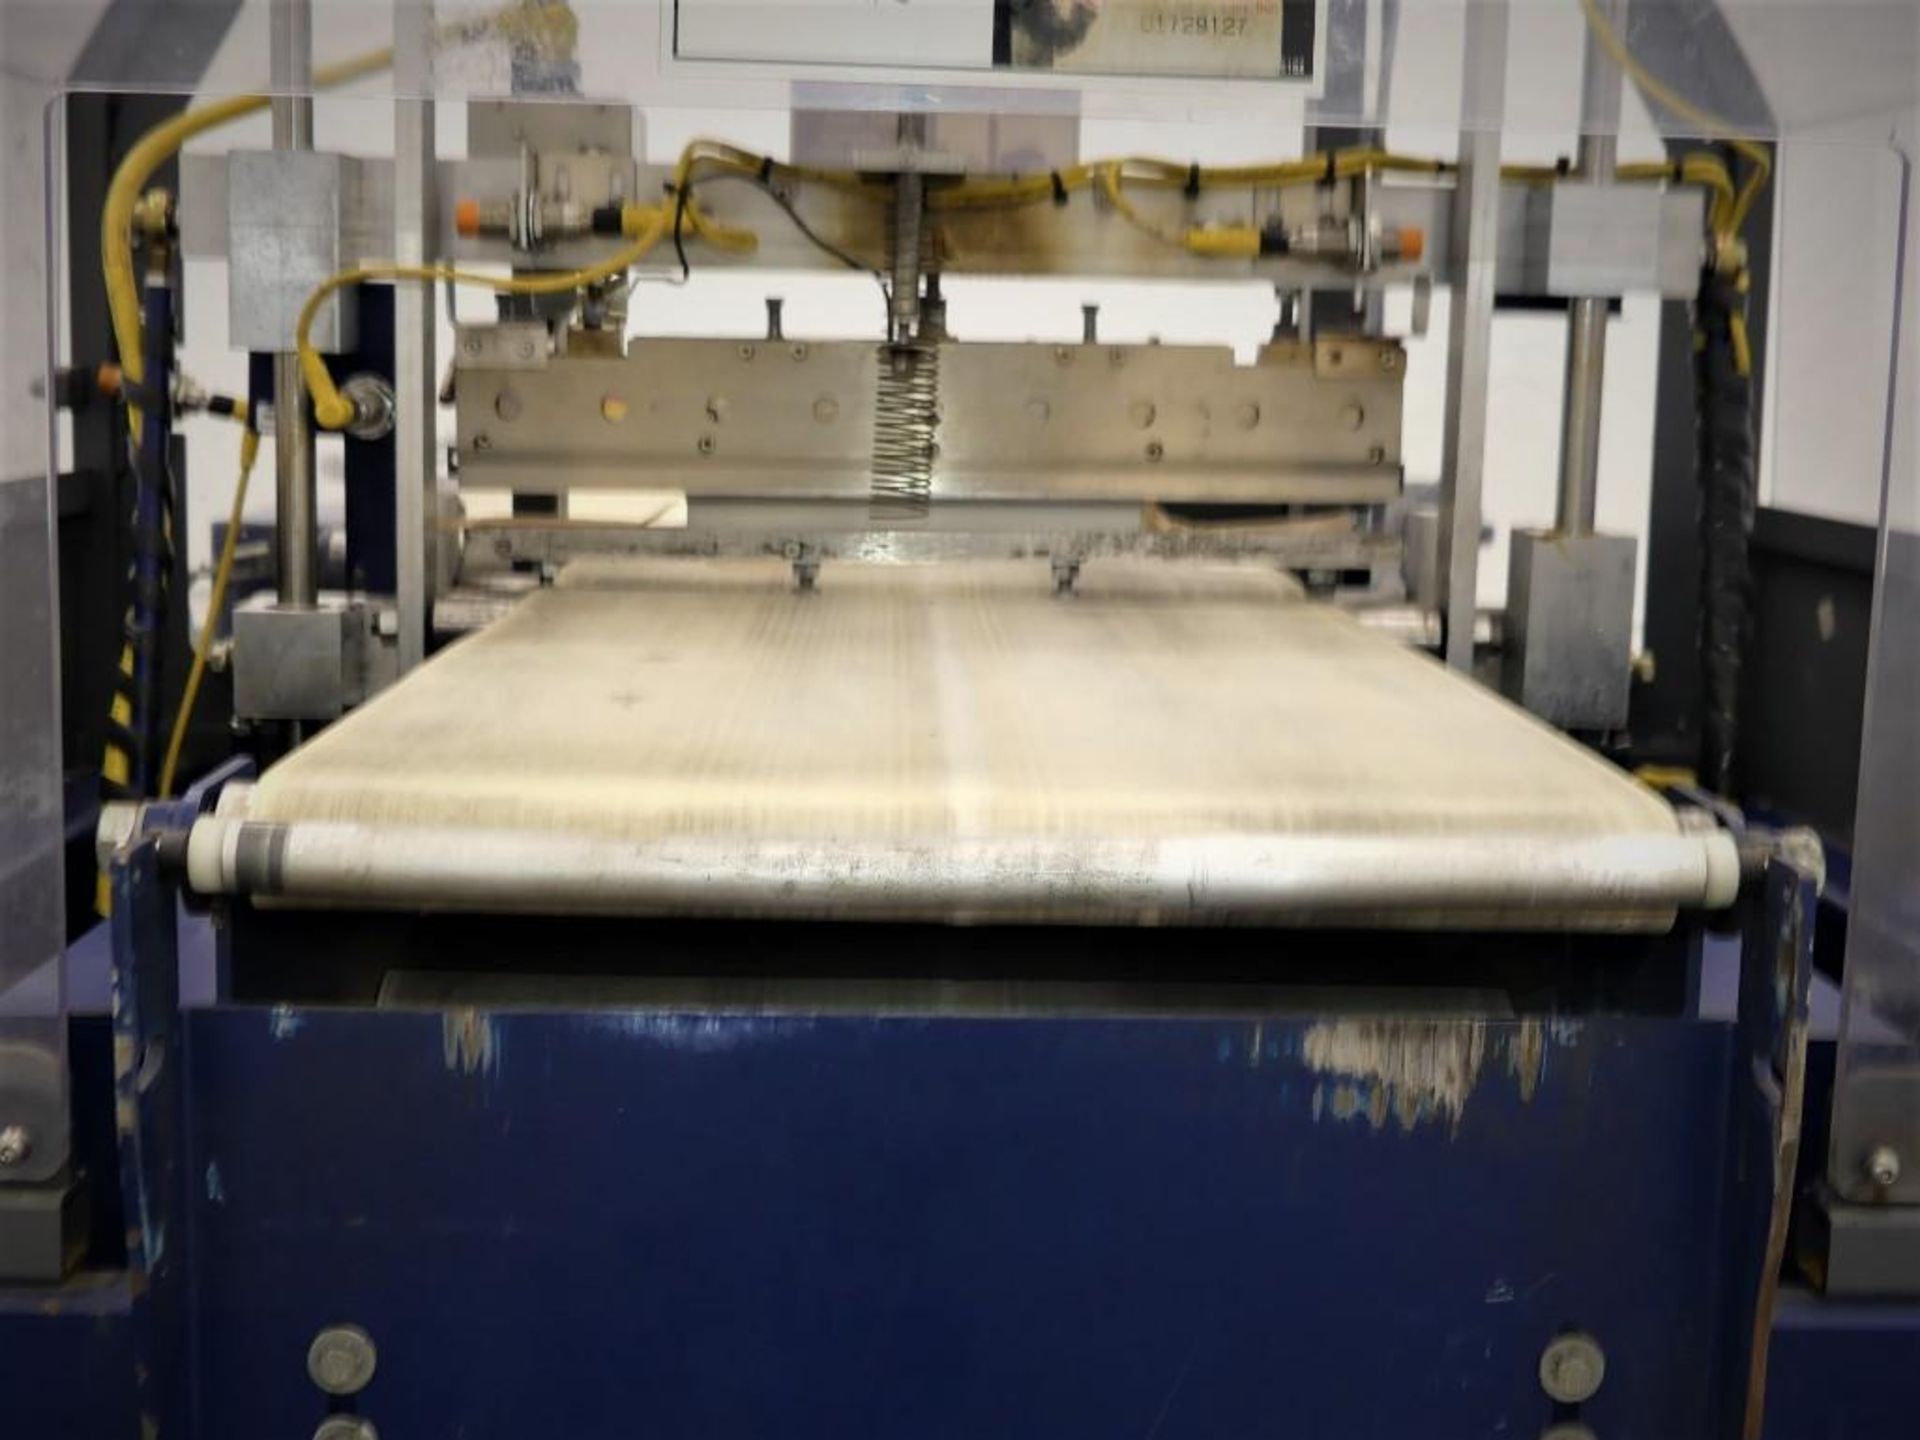 Lantech 200 Side Sealer Includes all parts, electronic components, manuals, etc - Image 15 of 17